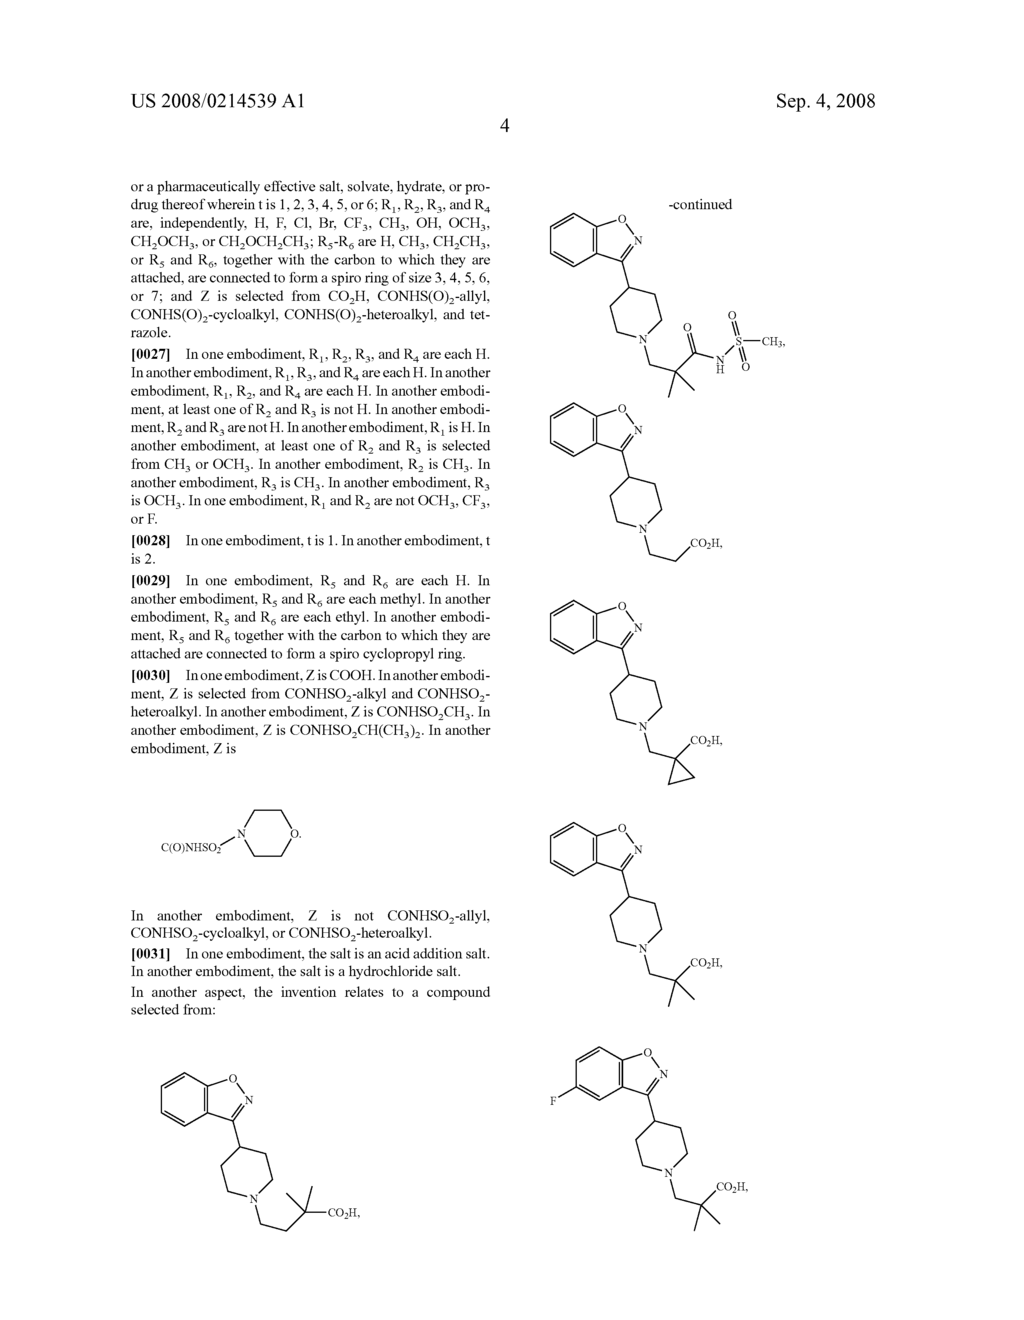 Benzisoxazole Piperidine Compounds and Methods of Use Thereof - diagram, schematic, and image 05